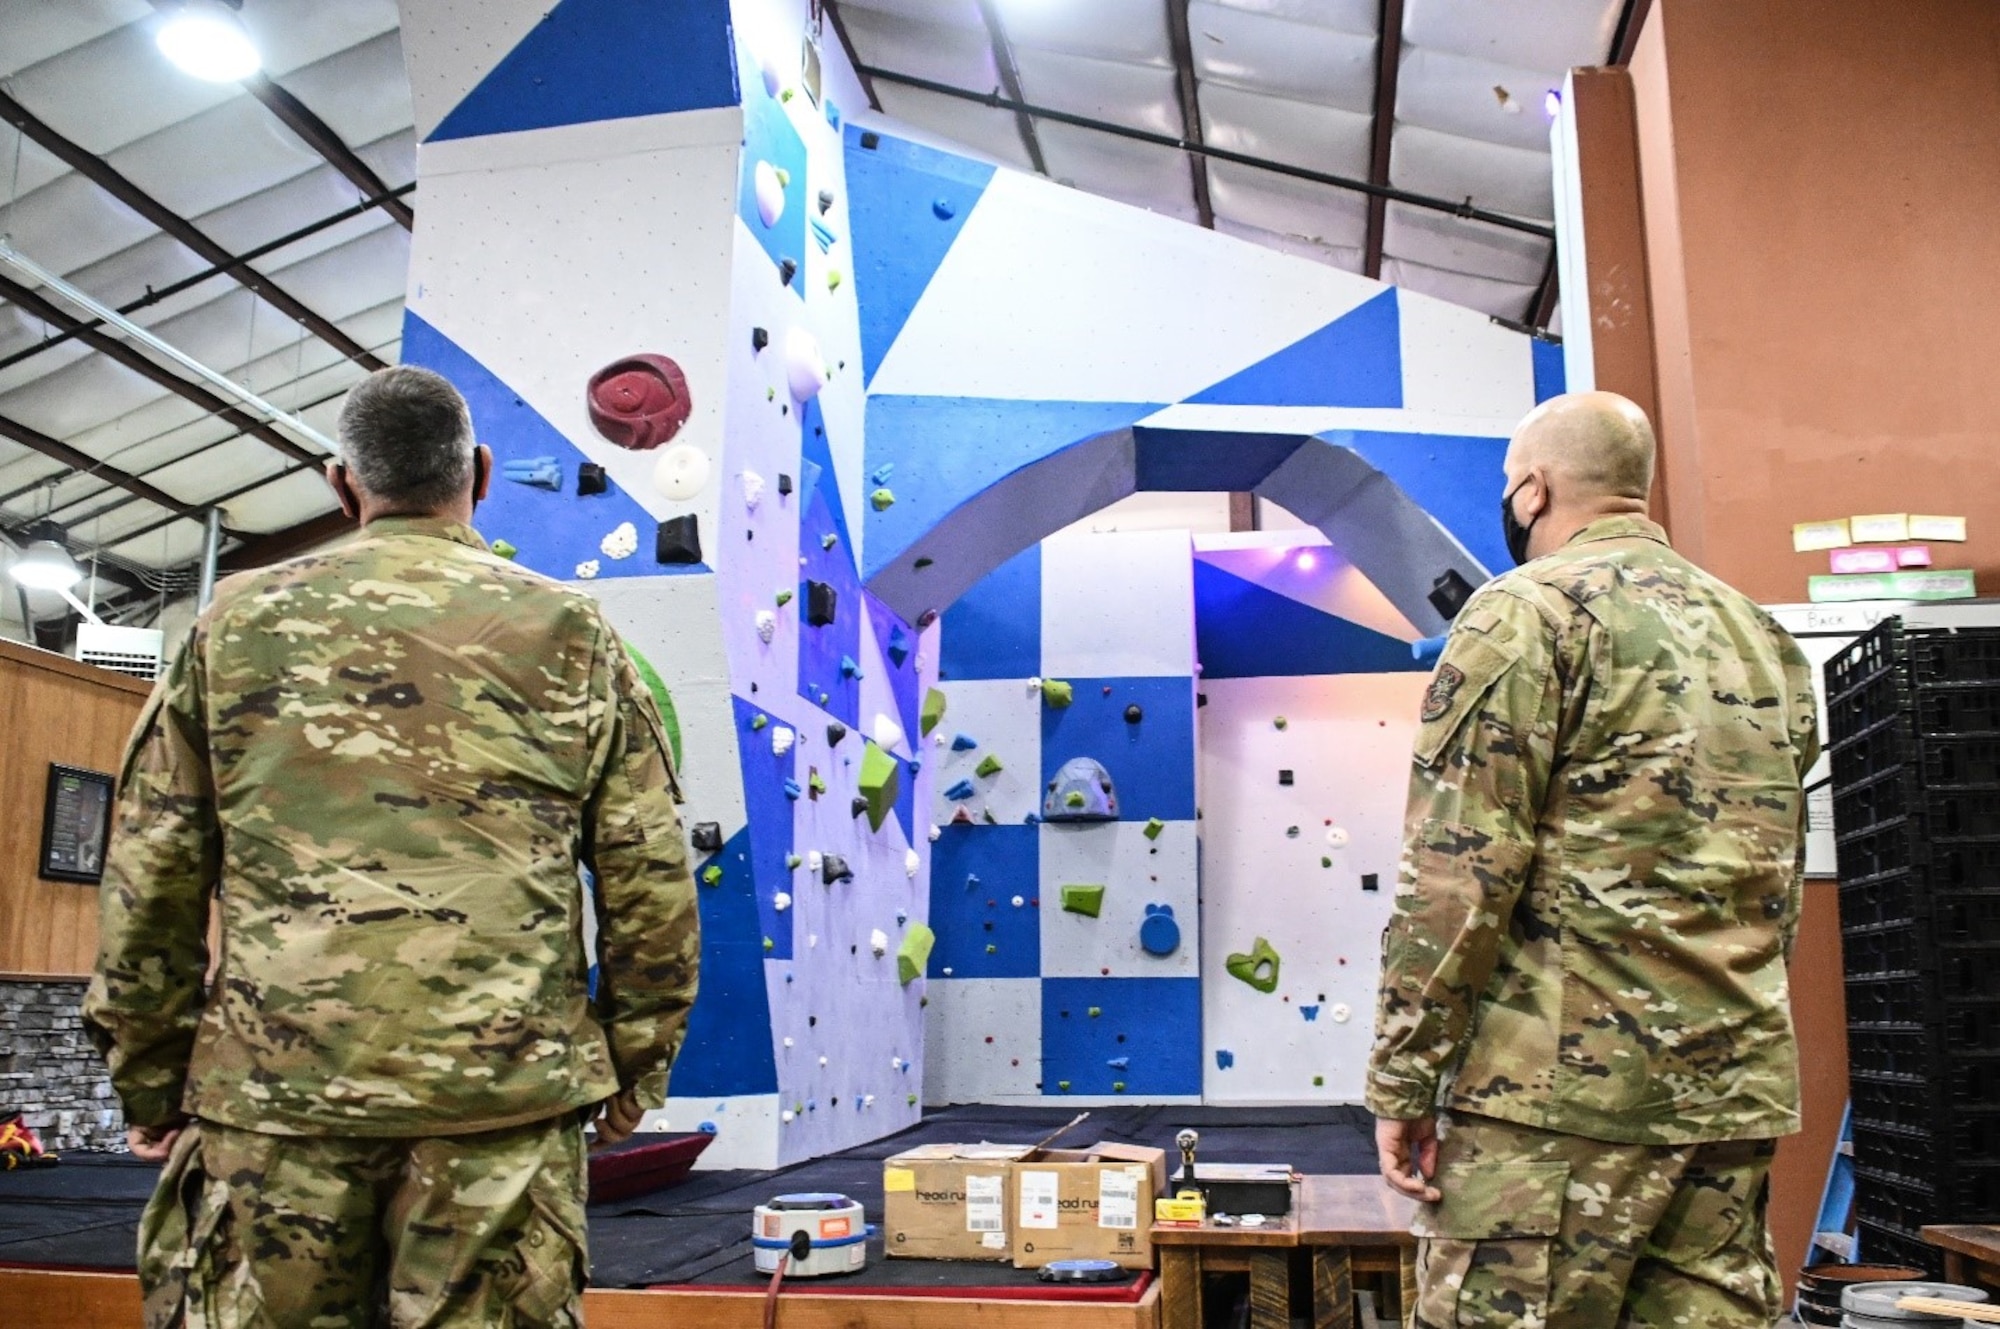 Two men in military uniforms look up at an indoor rock climbing wall